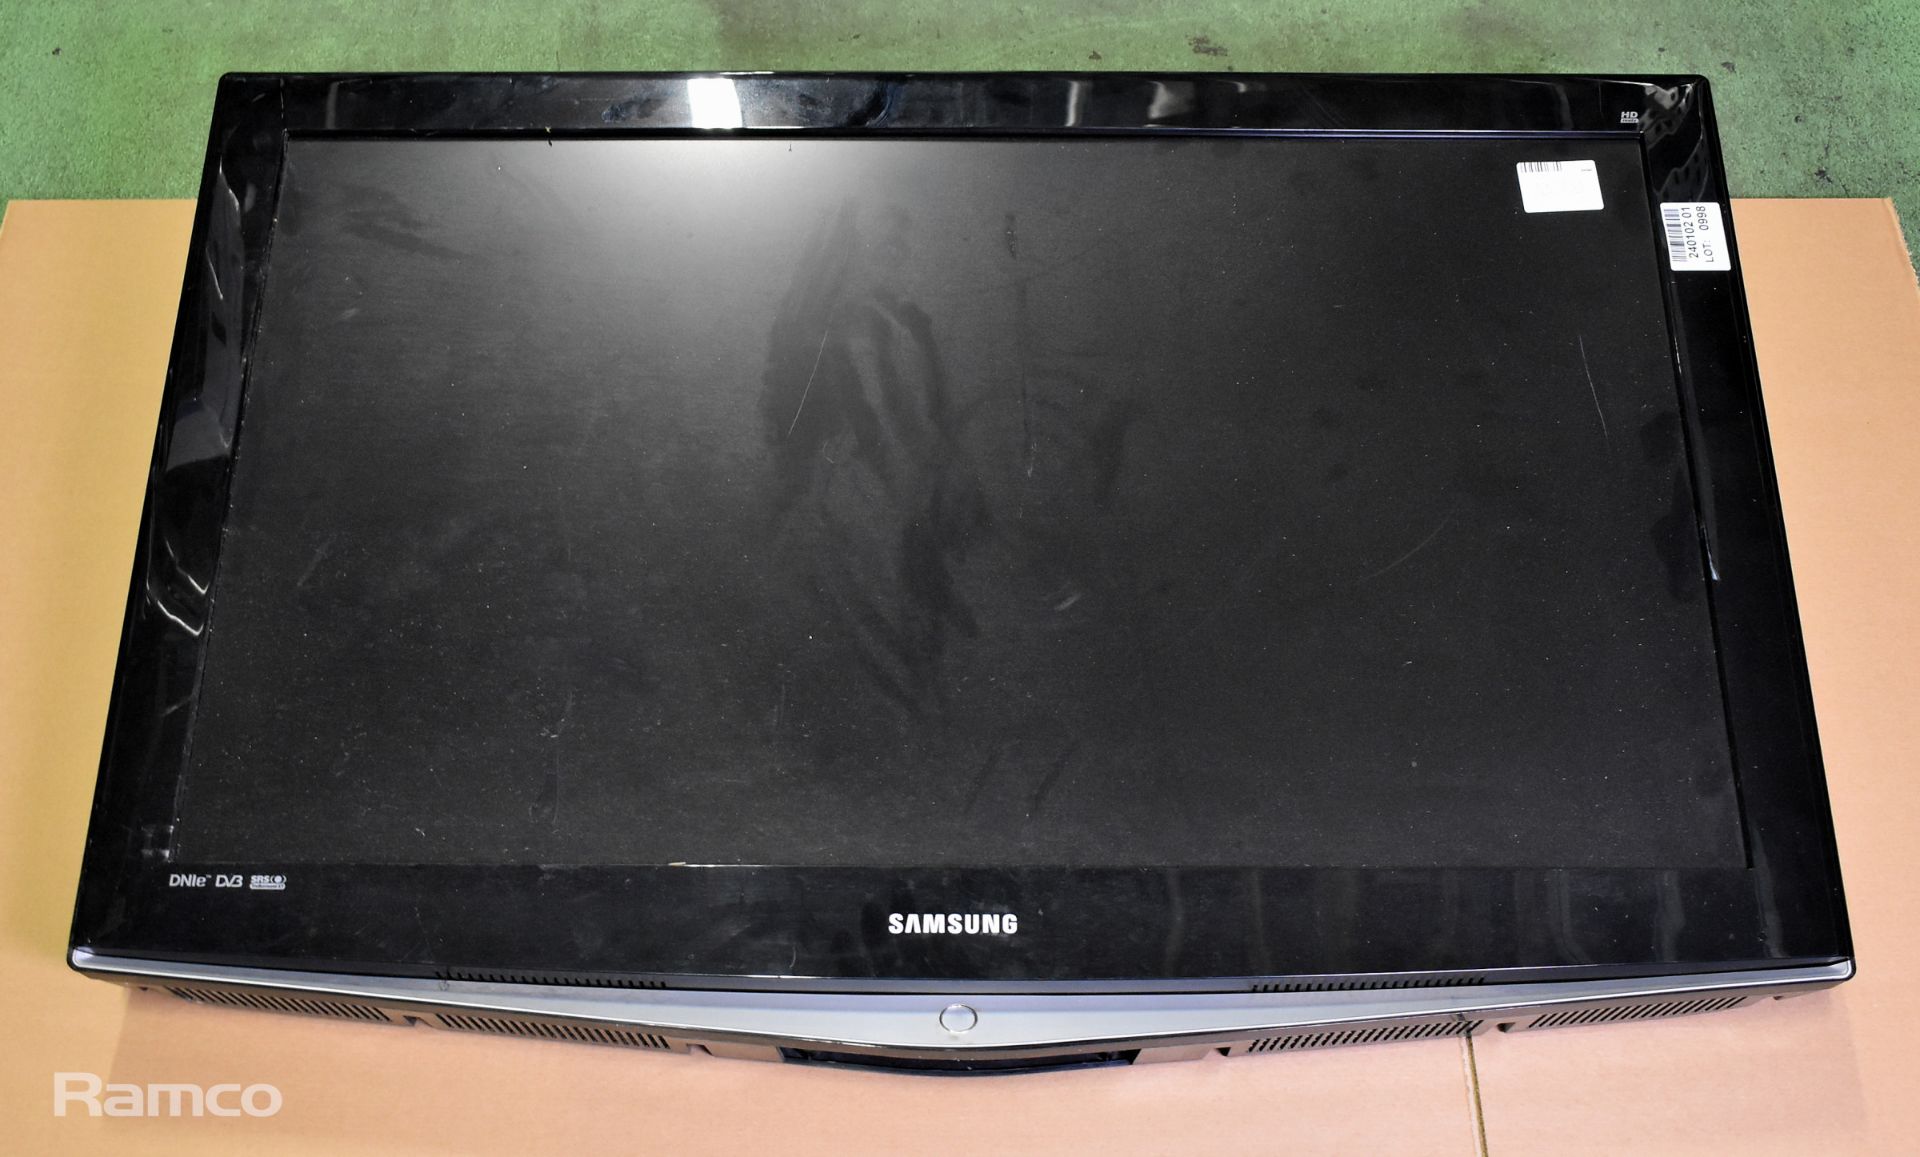 Samsung LE40R7BD 40 inch LCD TV - NO STAND - SCRATCHED SCREEN